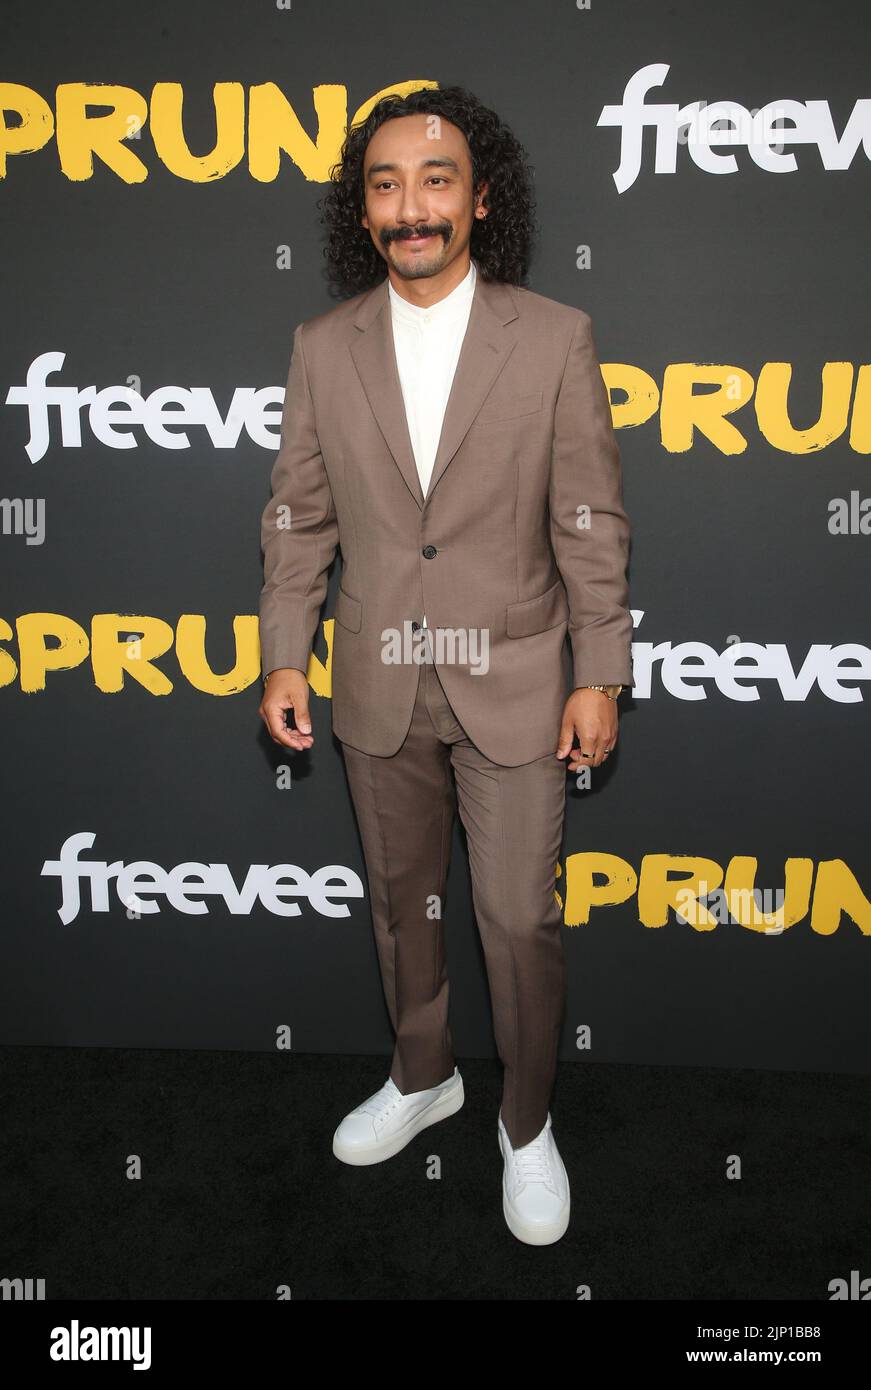 Los Angeles, California, USA. 14th Aug, 2022. Phillip Garcia. Red Carpet Premiere Of Freevee's 'Sprung' held at the Hollywood Forever Cemetery in Los Angeles. Credit: AdMedia Photo via/Newscom/Alamy Live News Stock Photo